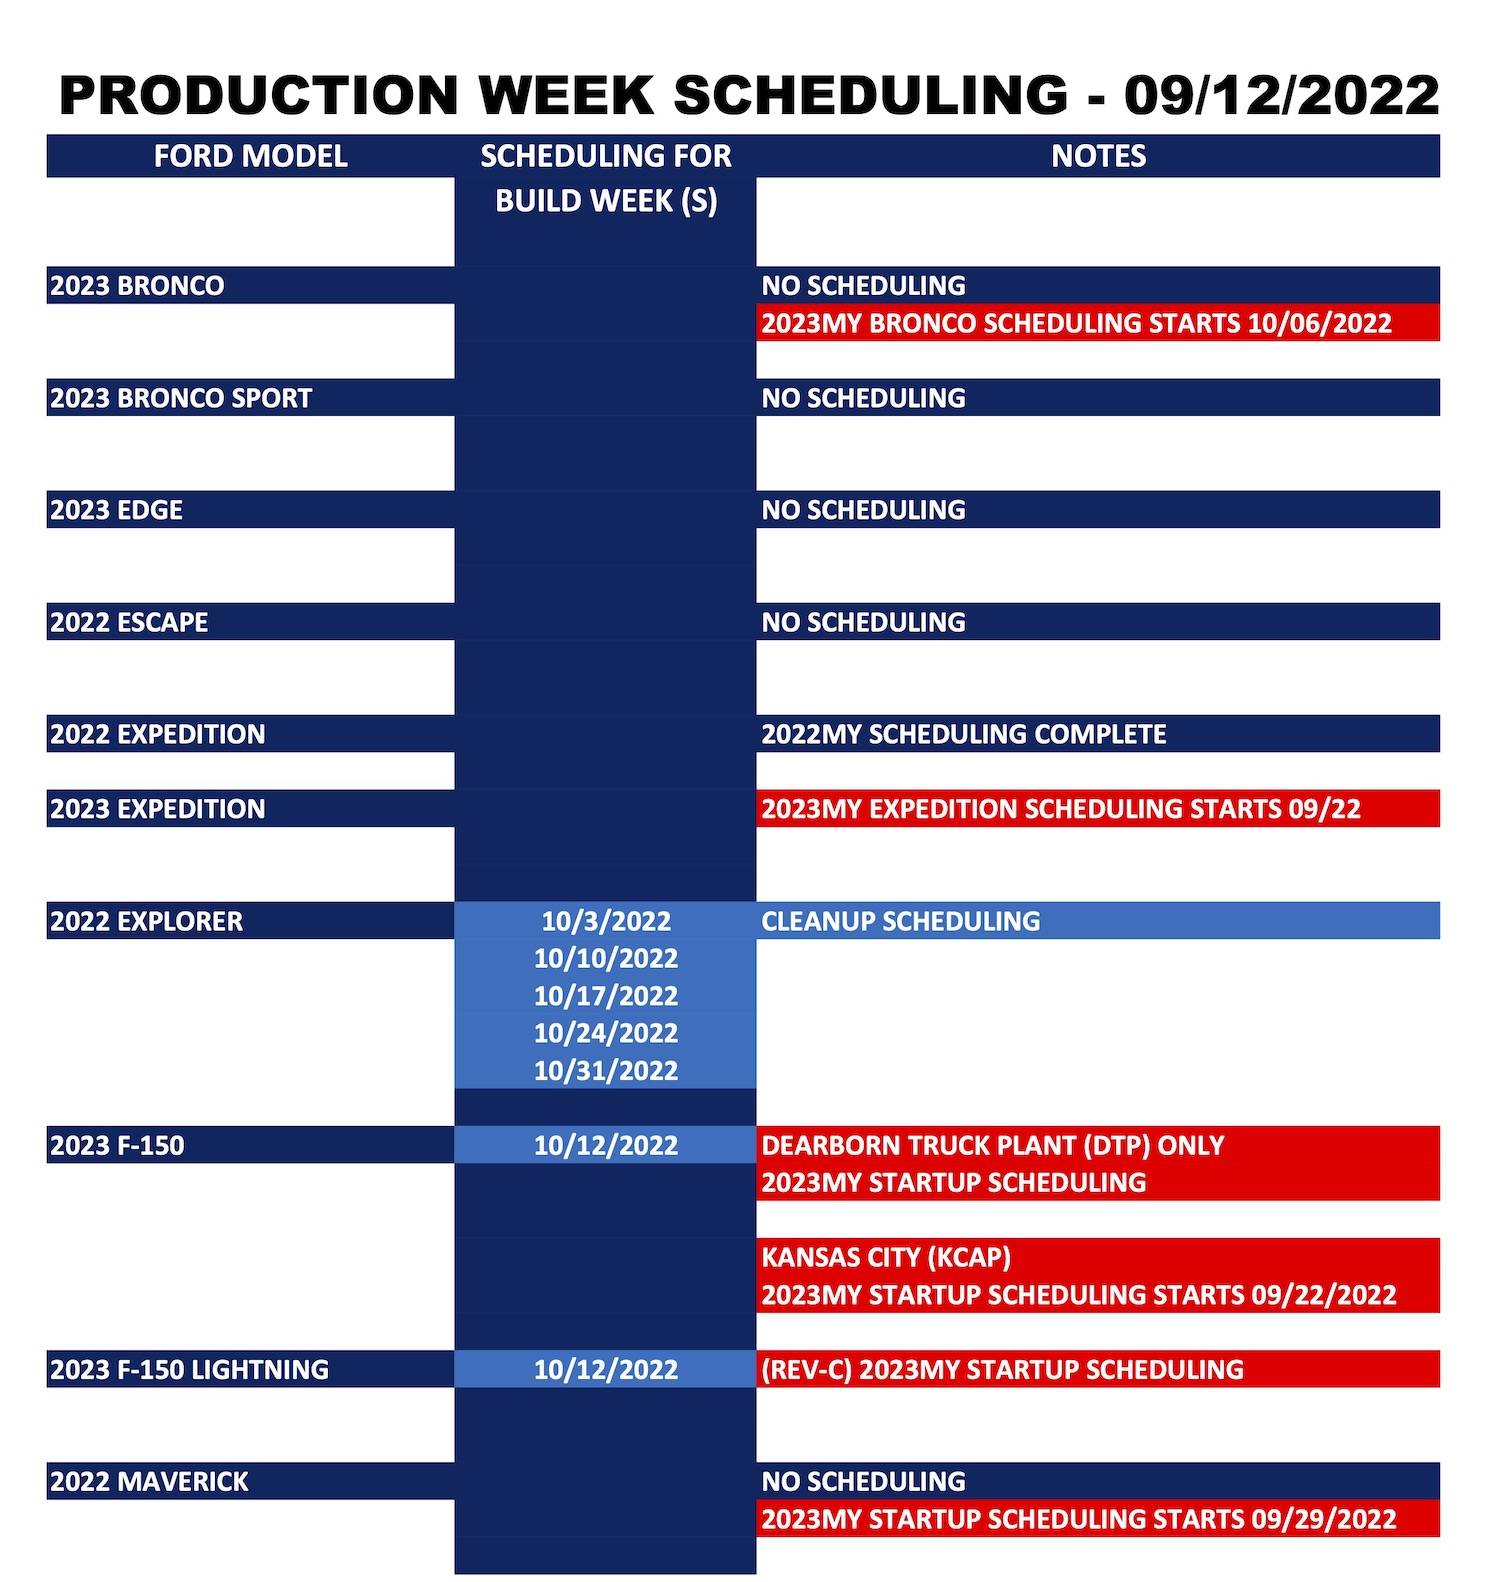 Ford Bronco Sport ⏰ No Bronco Sport Scheduling This Week (9/12) Ford_Forums_Production Week Scheduling_2022-09-12_1